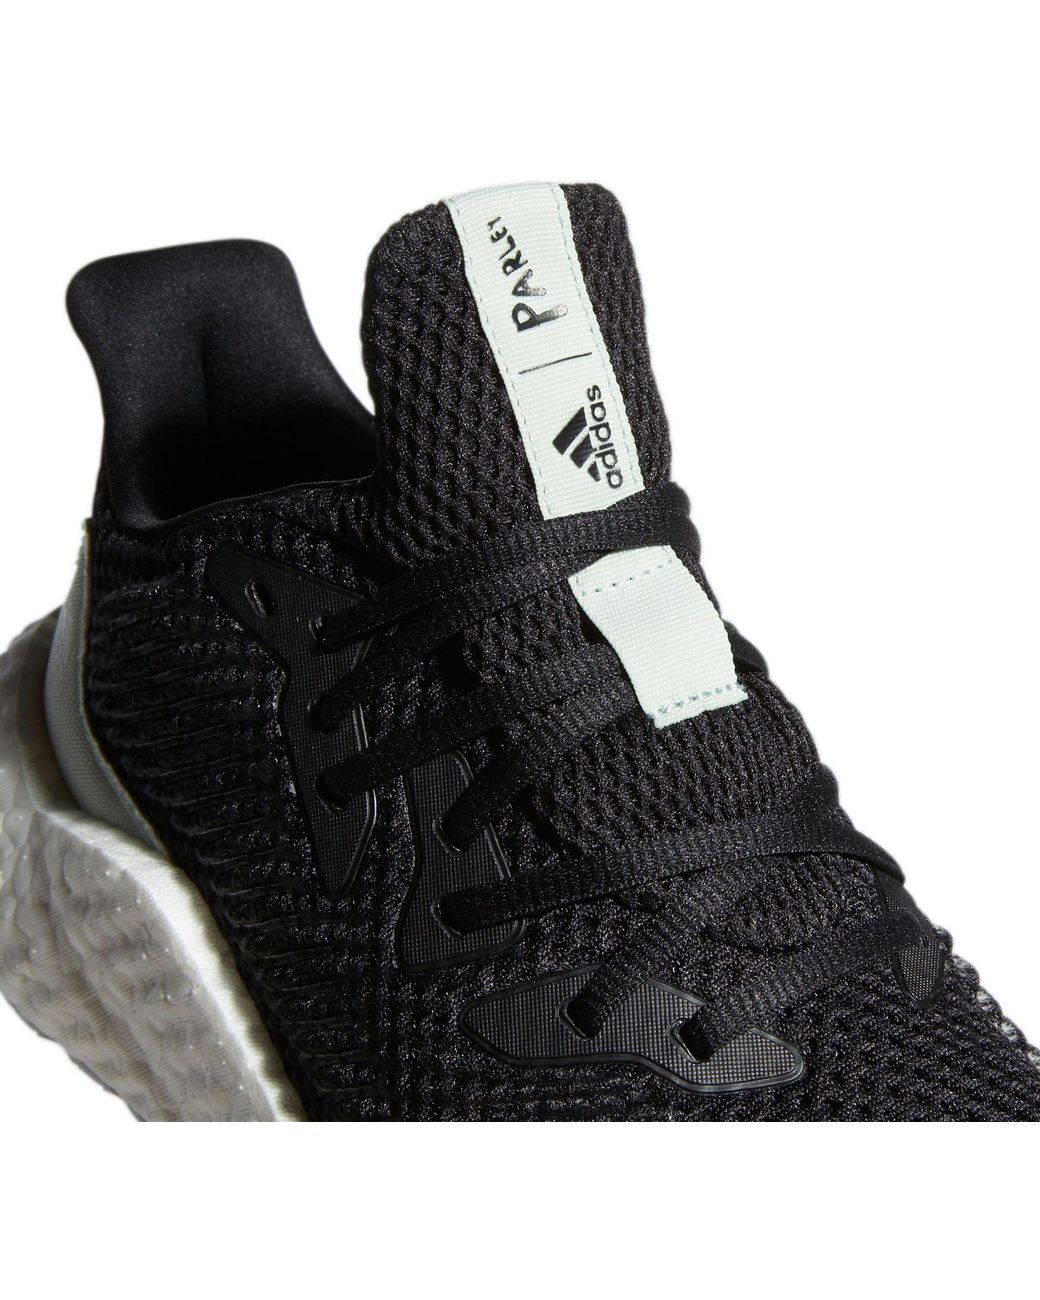 adidas Alphaboost Parley Shoes in Black/White (Black) for Men | Lyst